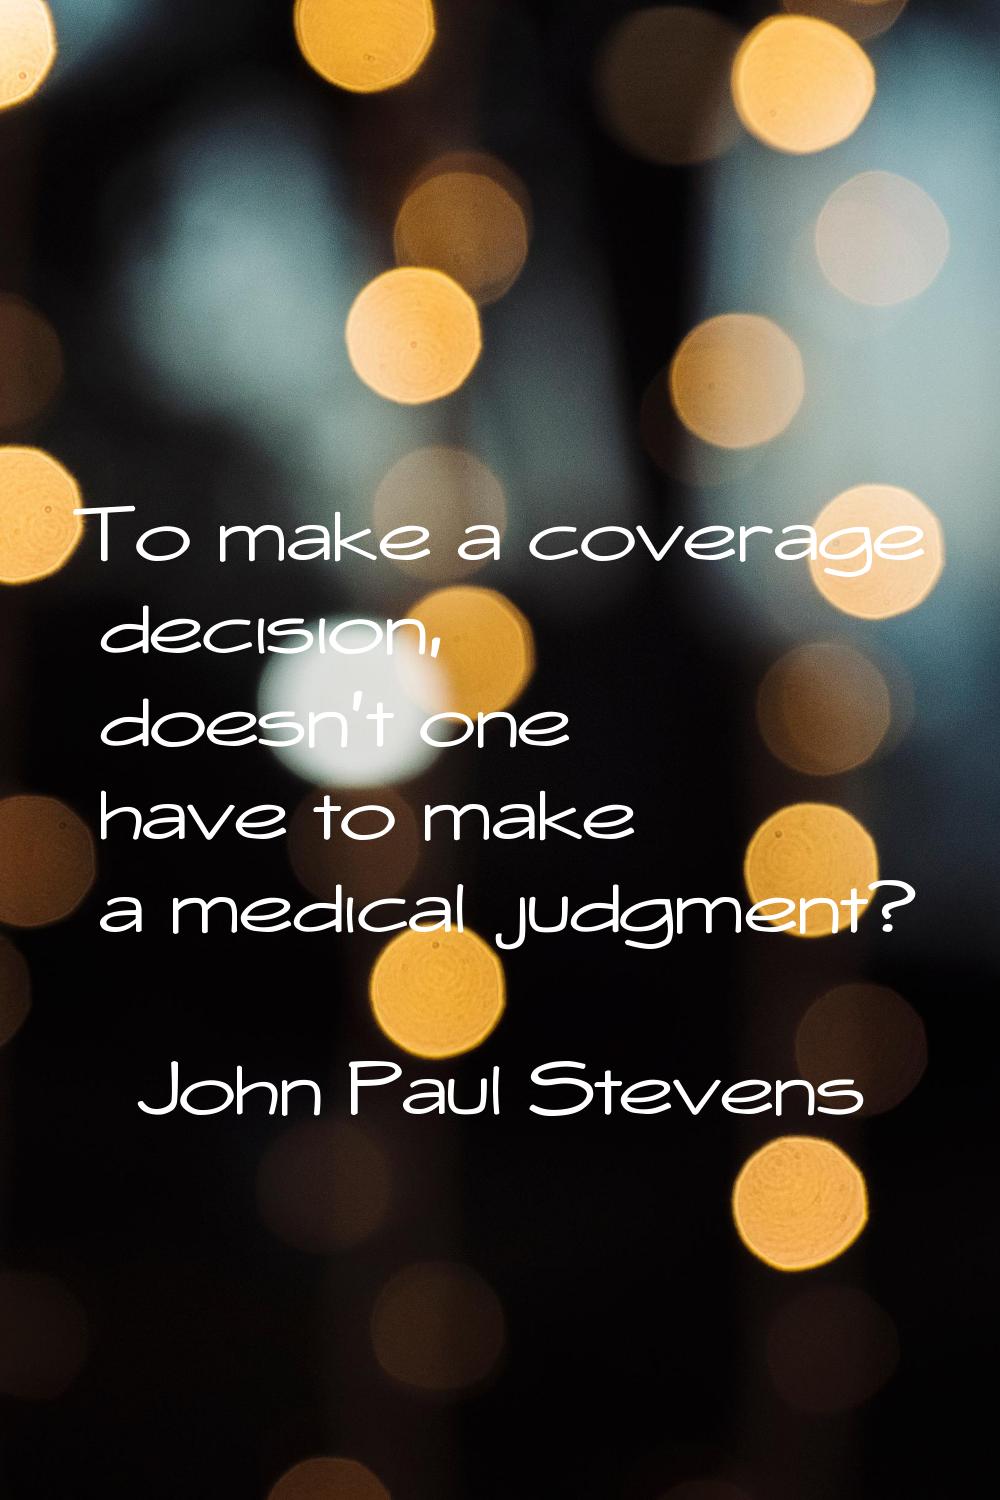 To make a coverage decision, doesn't one have to make a medical judgment?